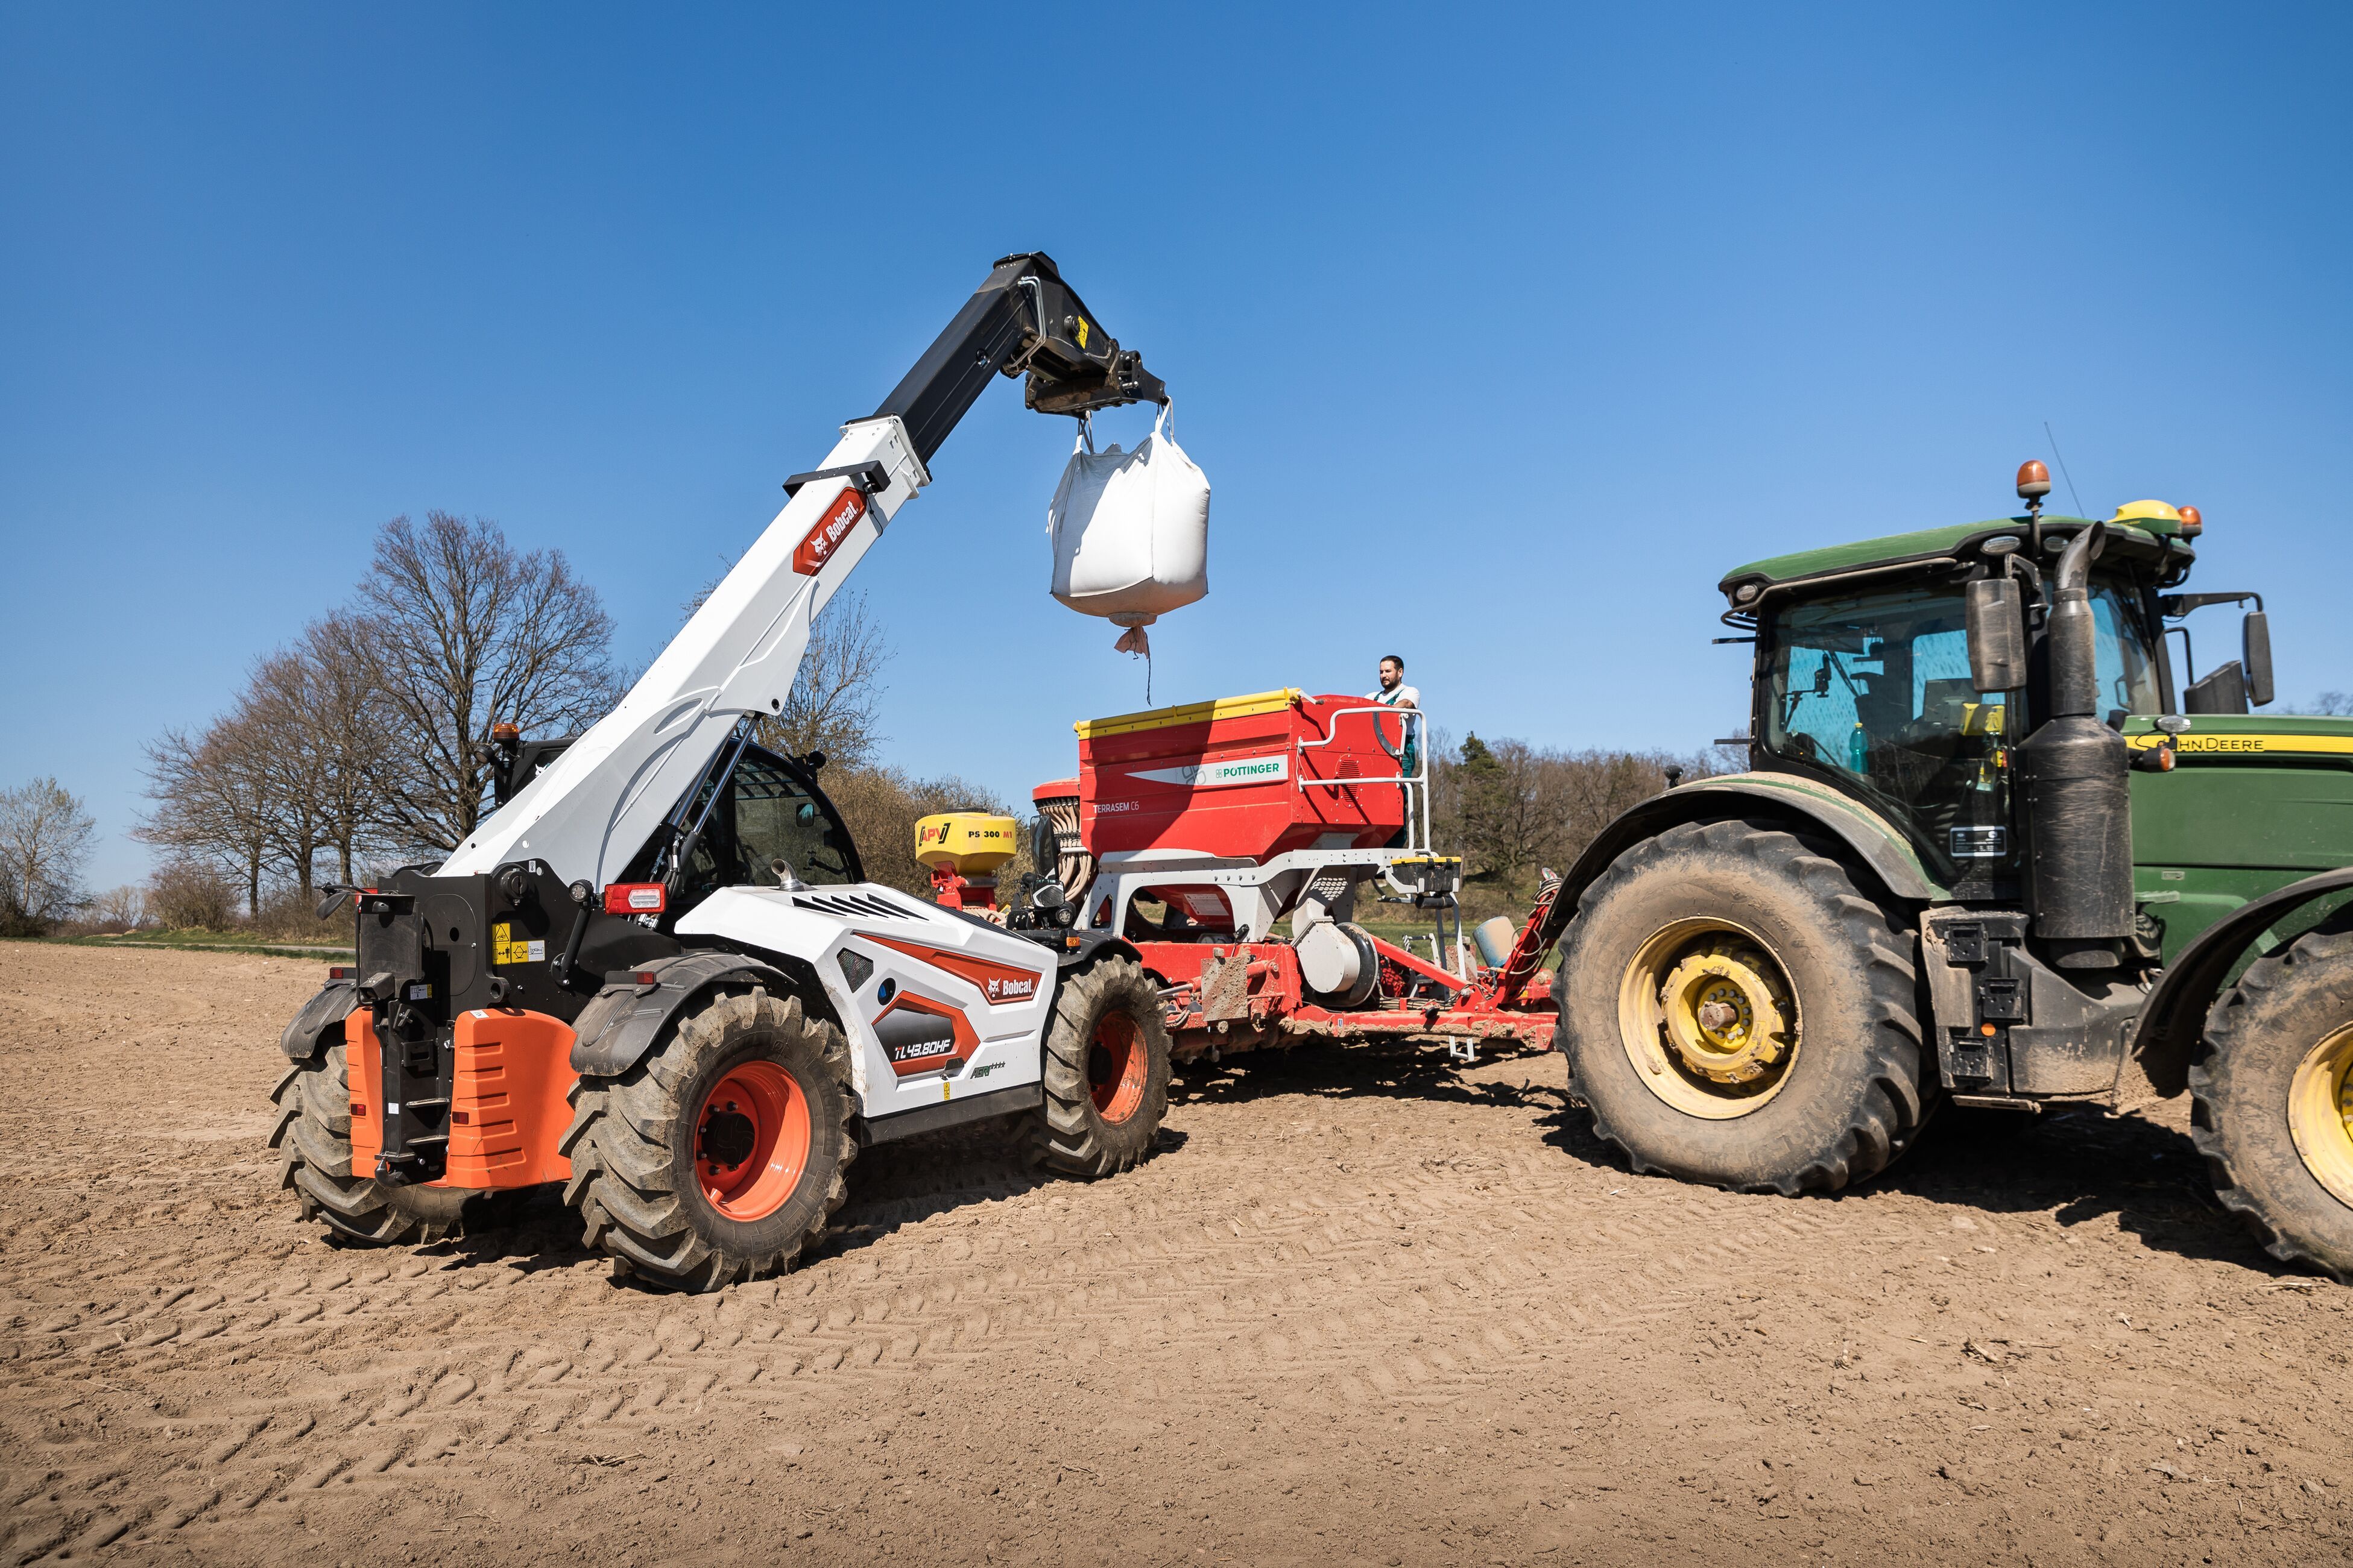 New Bobcat Products at LAMMA - Telehandlers & Much More